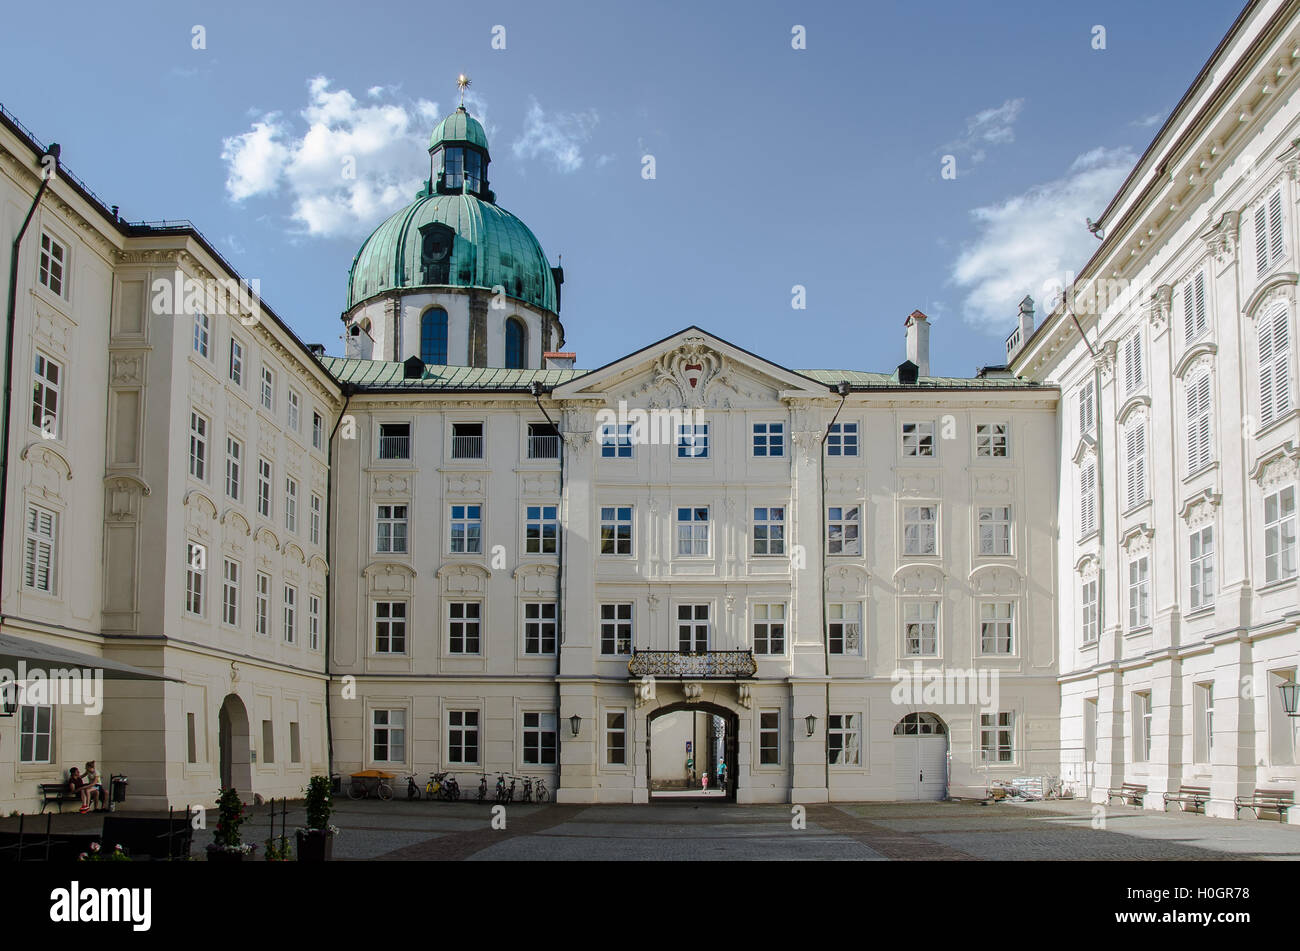 considered one of the three most significant cultural buildings in the country, along with the Hofburg Palace and Schönbrunn Stock Photo